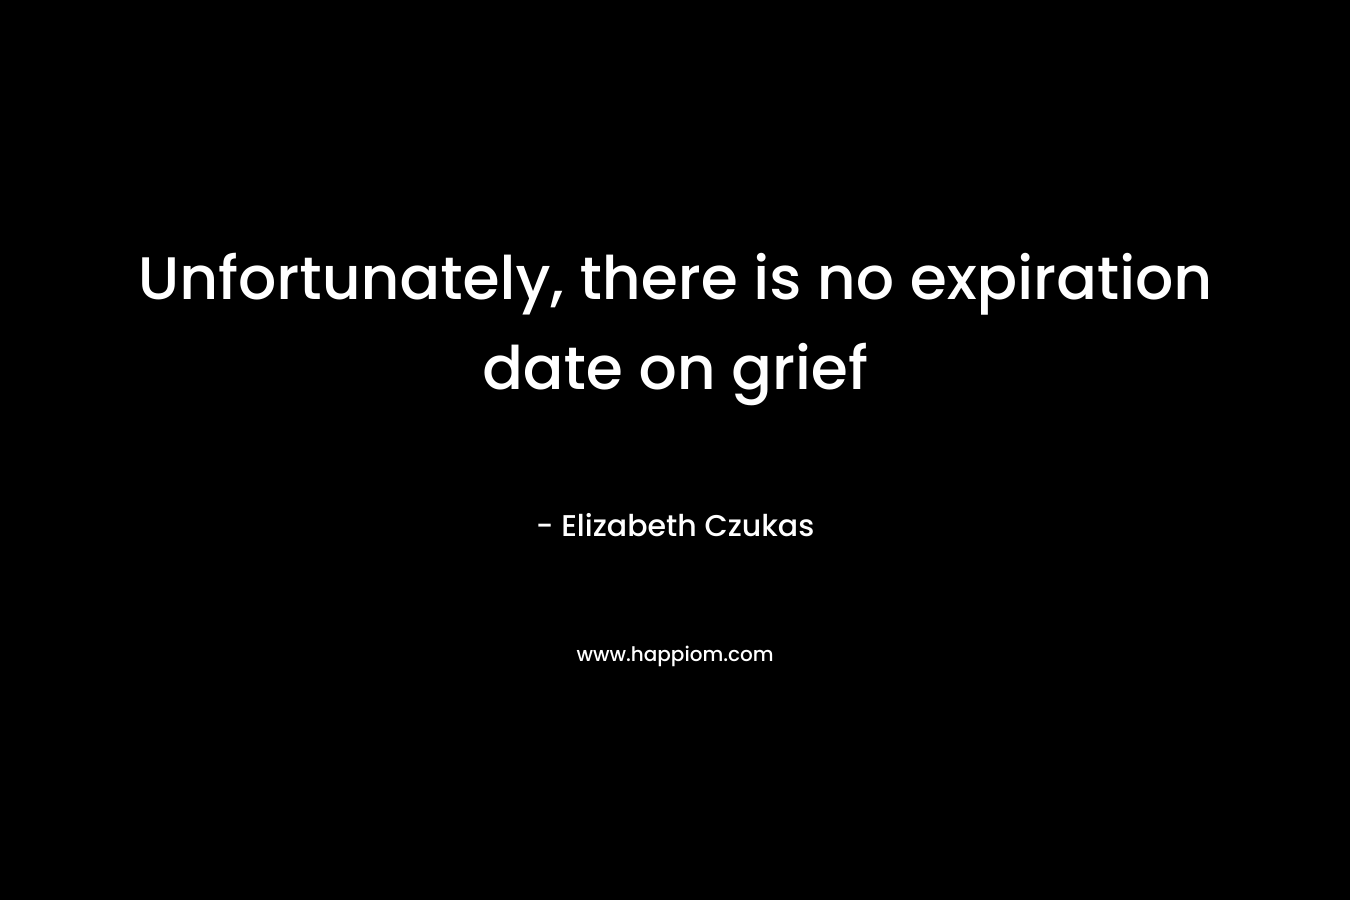 Unfortunately, there is no expiration date on grief